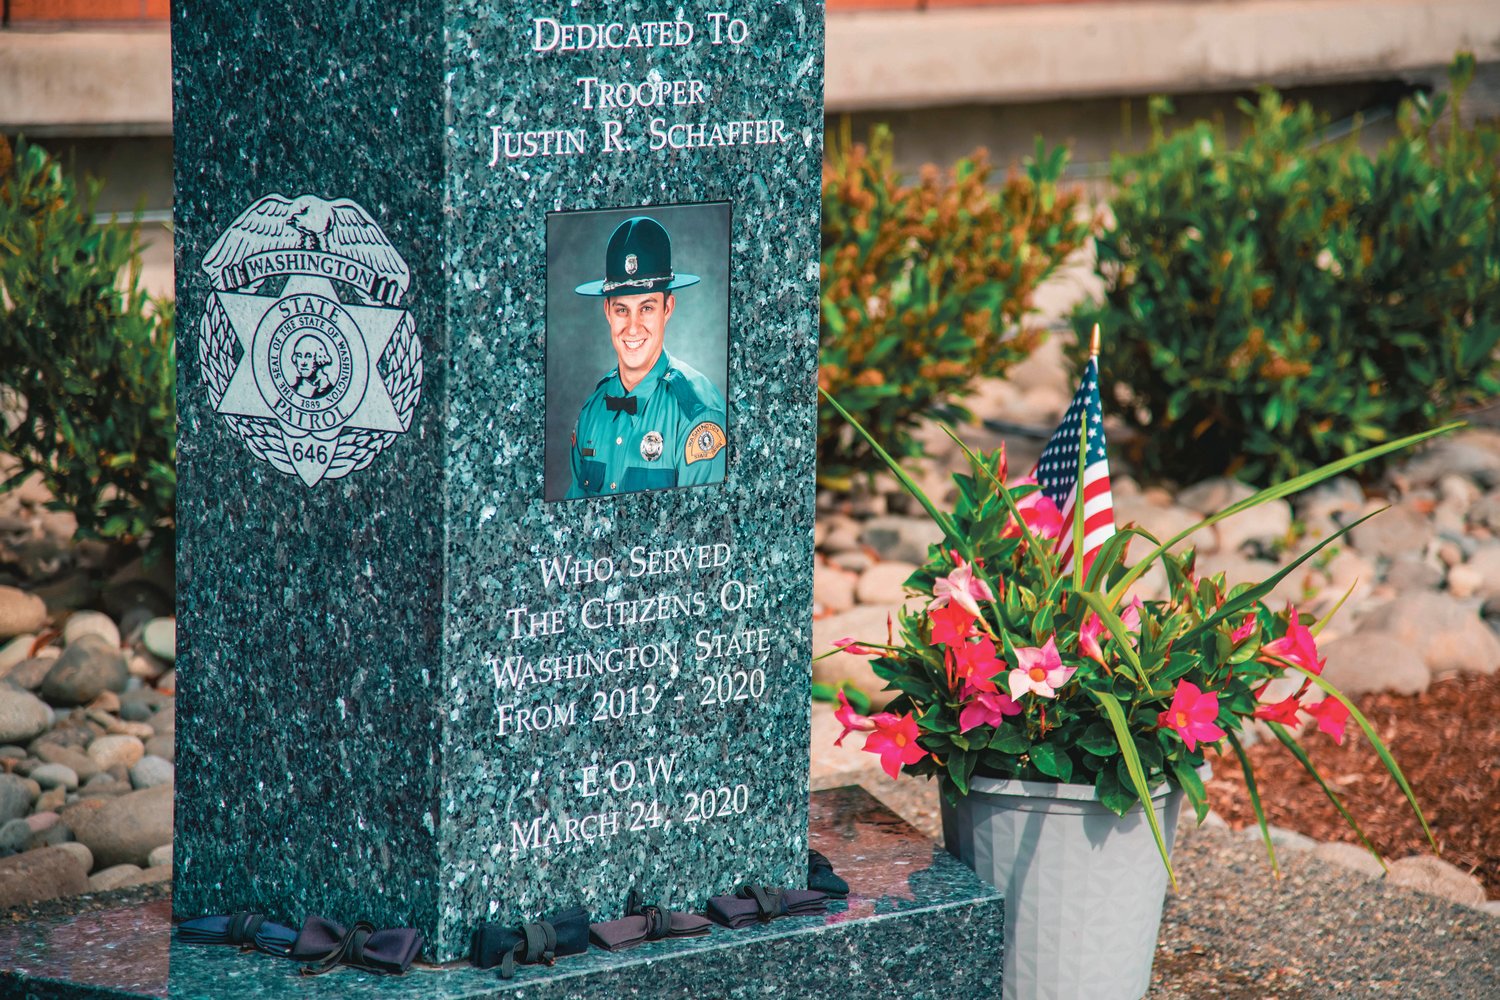 Bowties were placed around a memorial dedicated to trooper Justin R. Schaffer on Sunday in Chehalis.